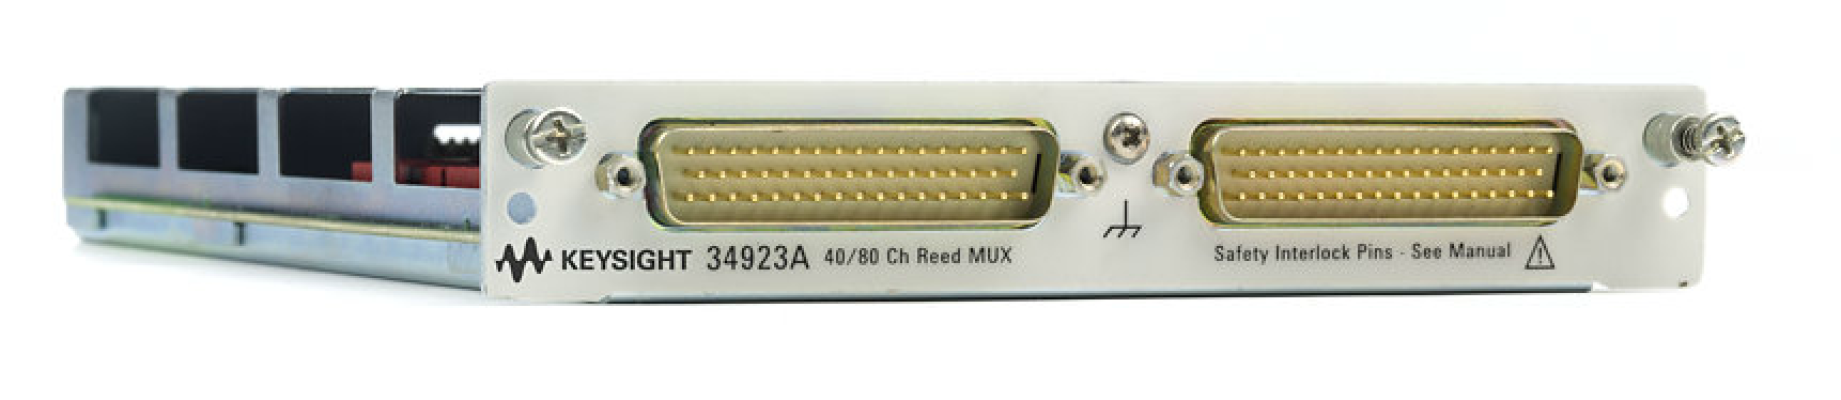 40/80 Channel Reed Multiplexer for 34980A, 34923A